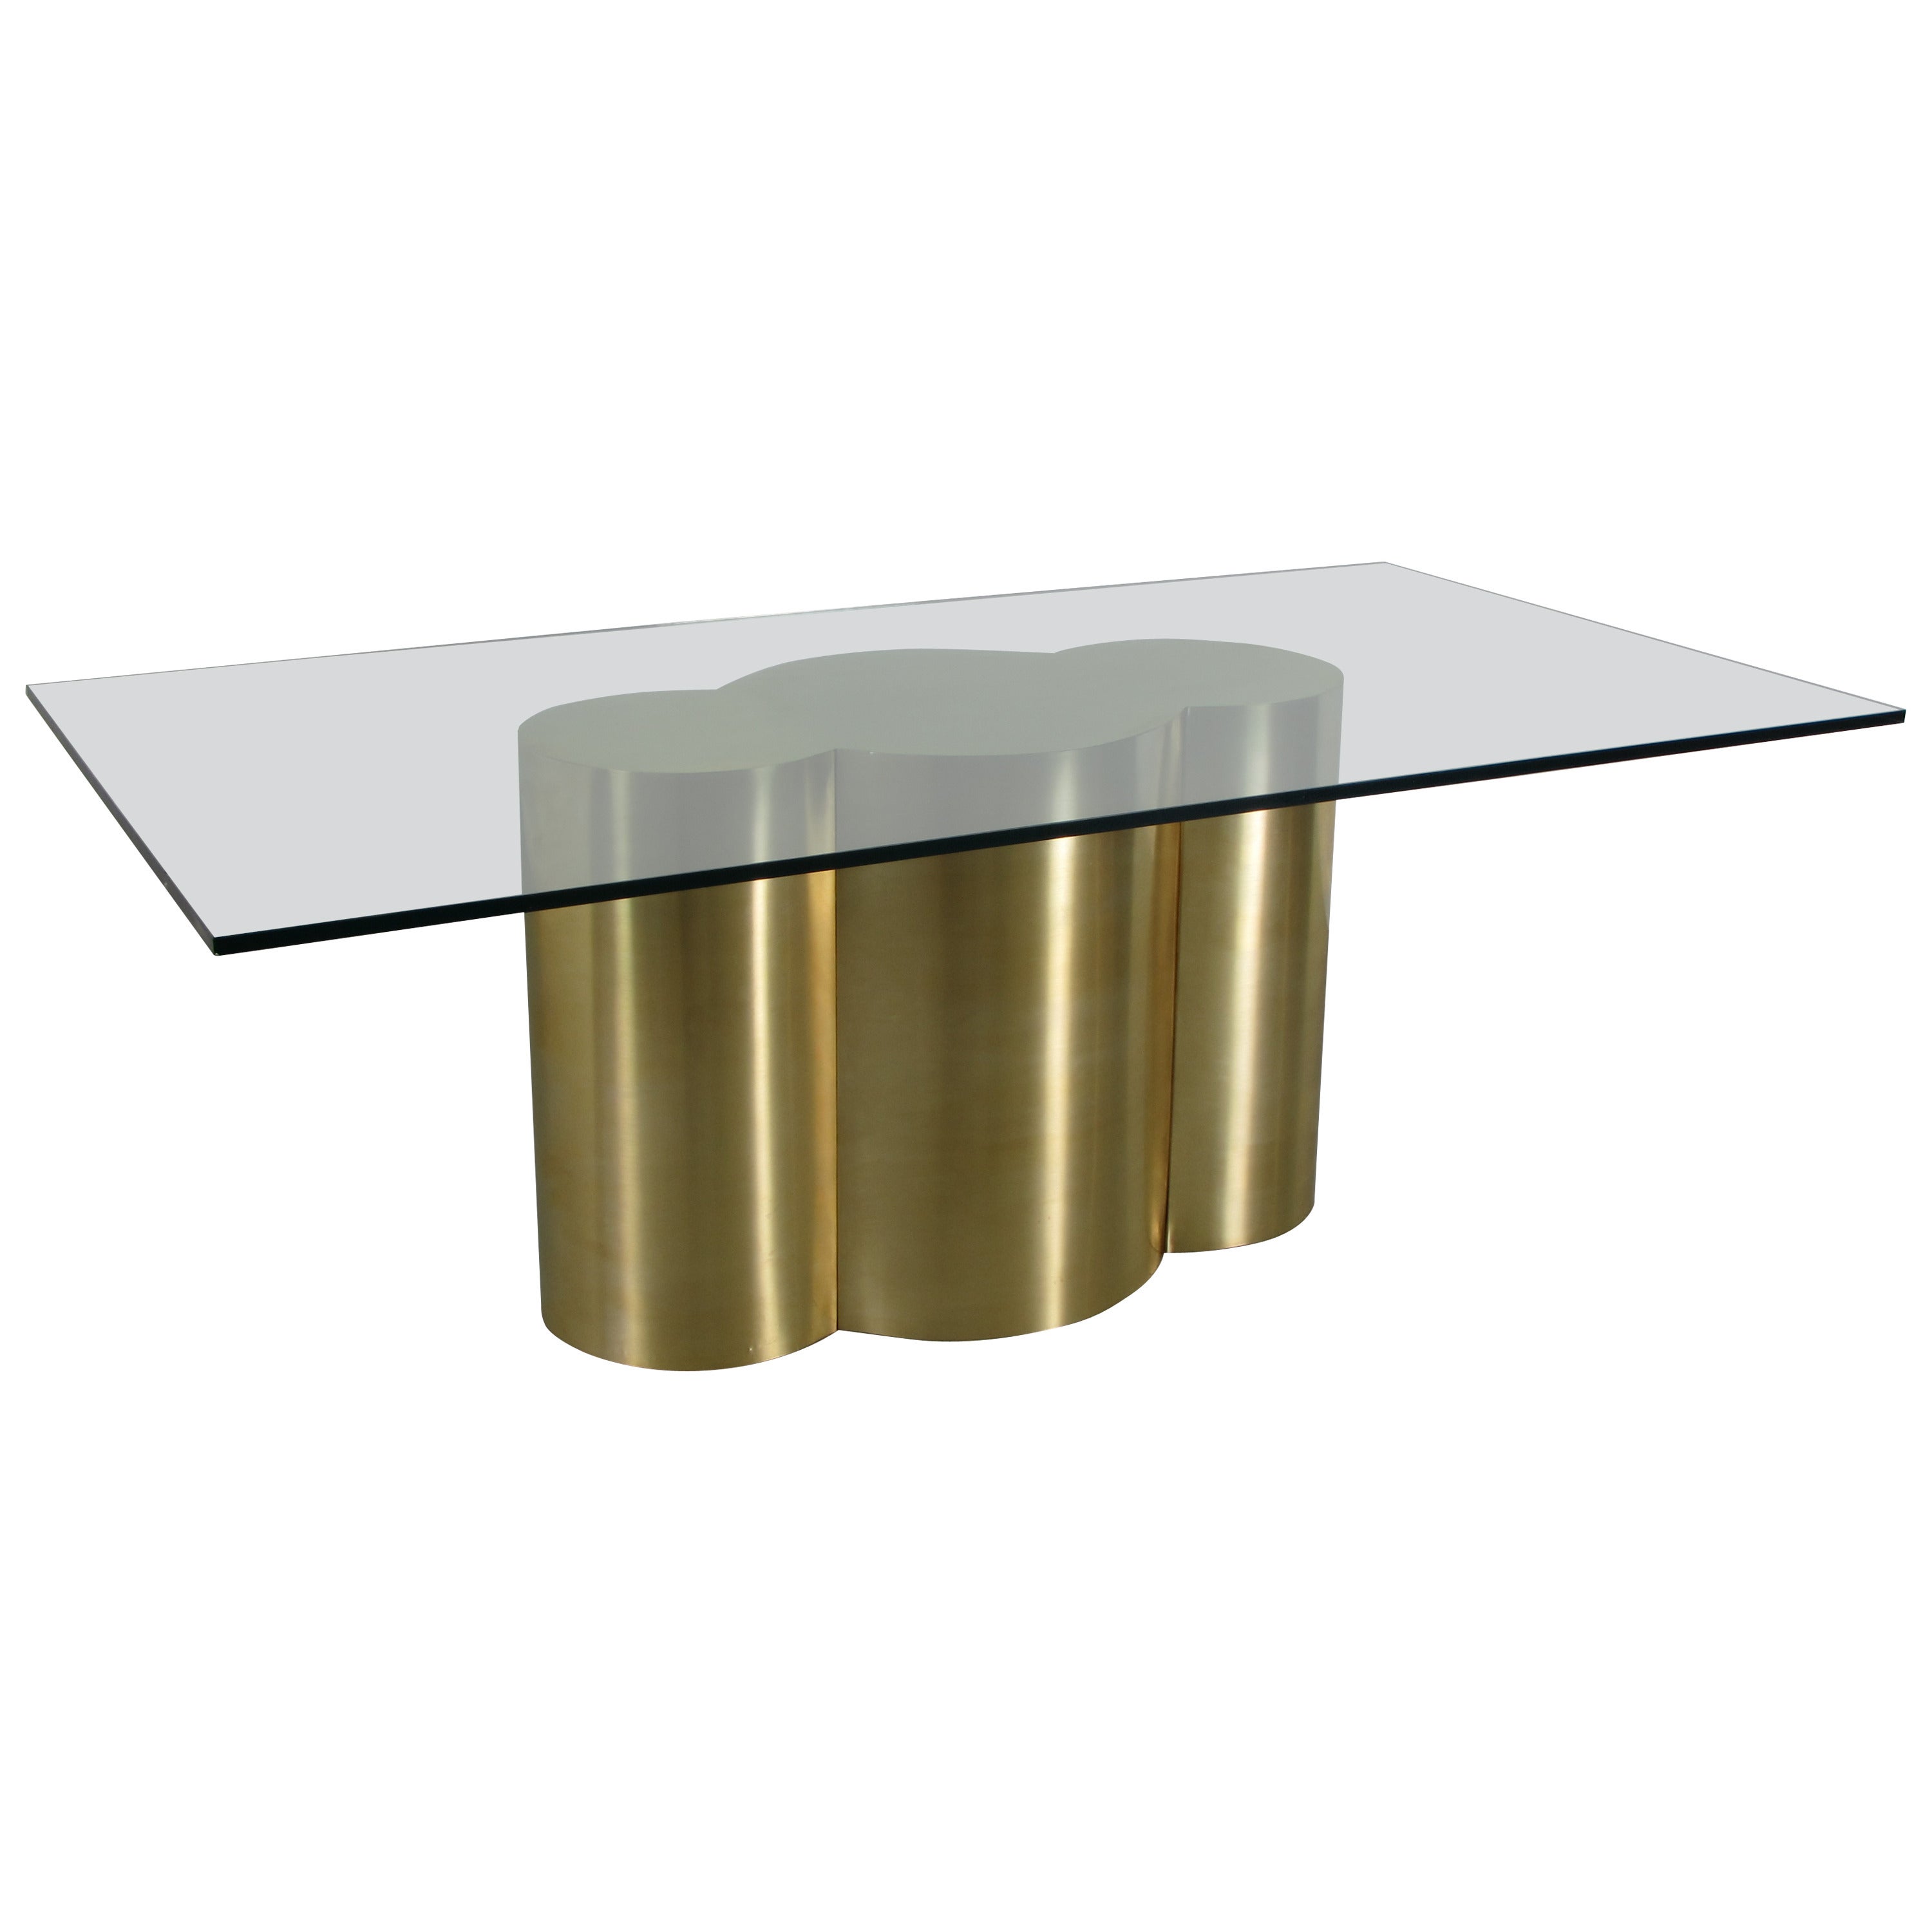 Custom Quatrefoil Dining Table Base in Polished Brass by Refine Limited